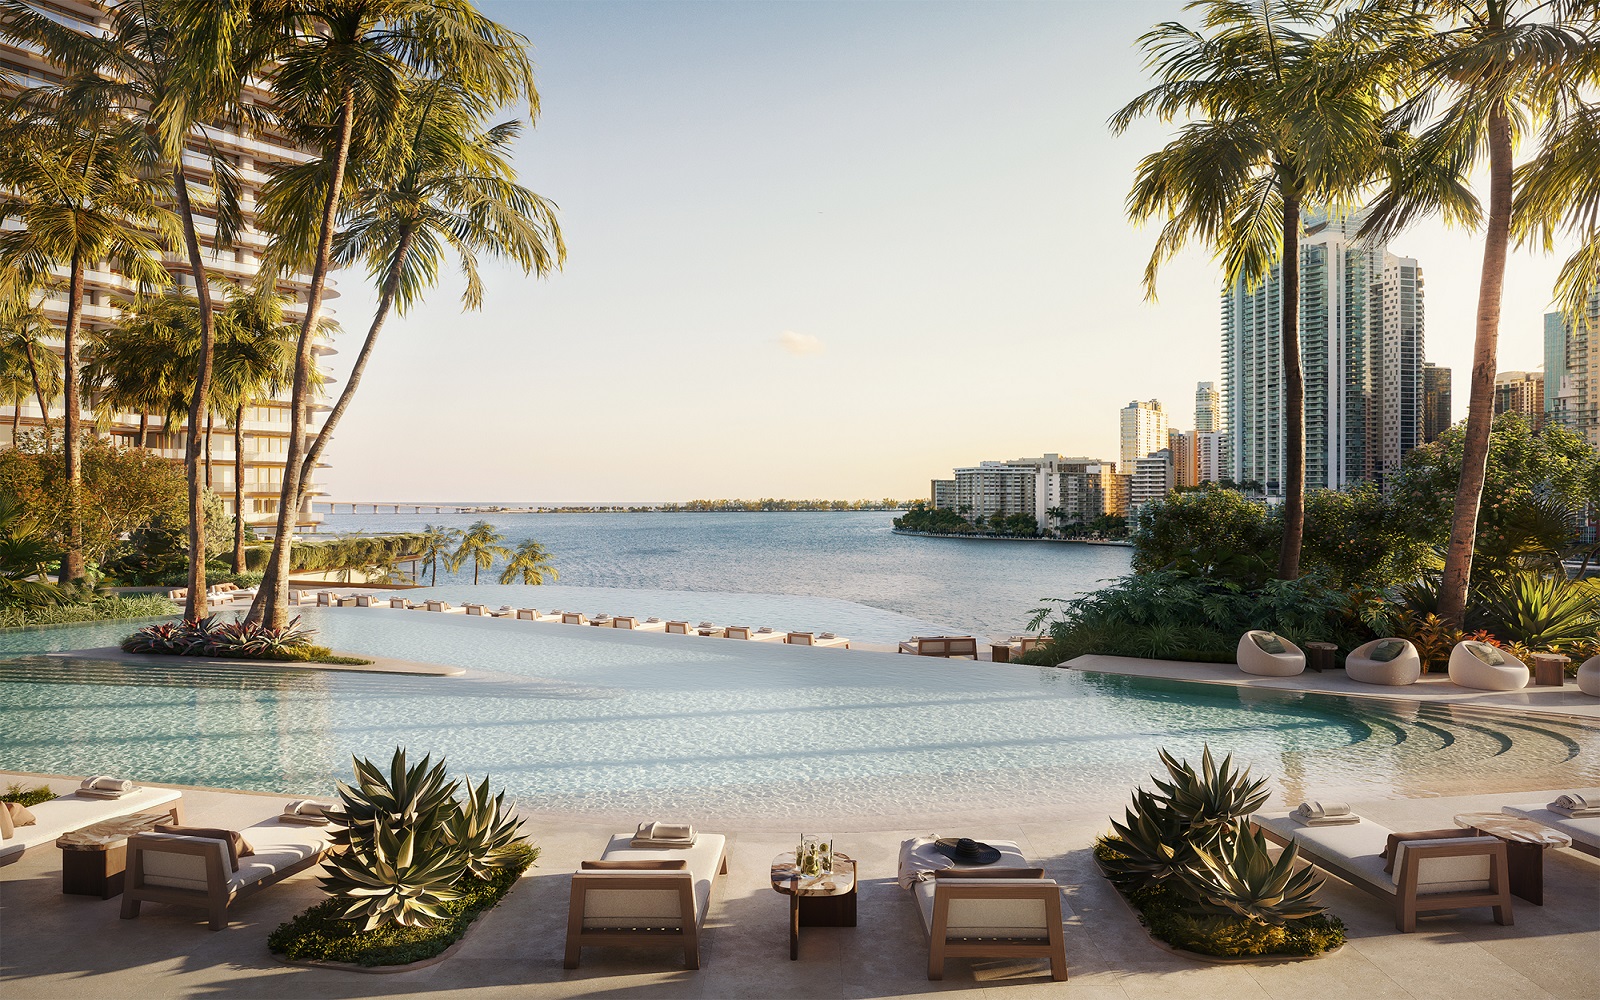 view across the beach and swimming pool from The Residences at Mandarin Oriental Miami